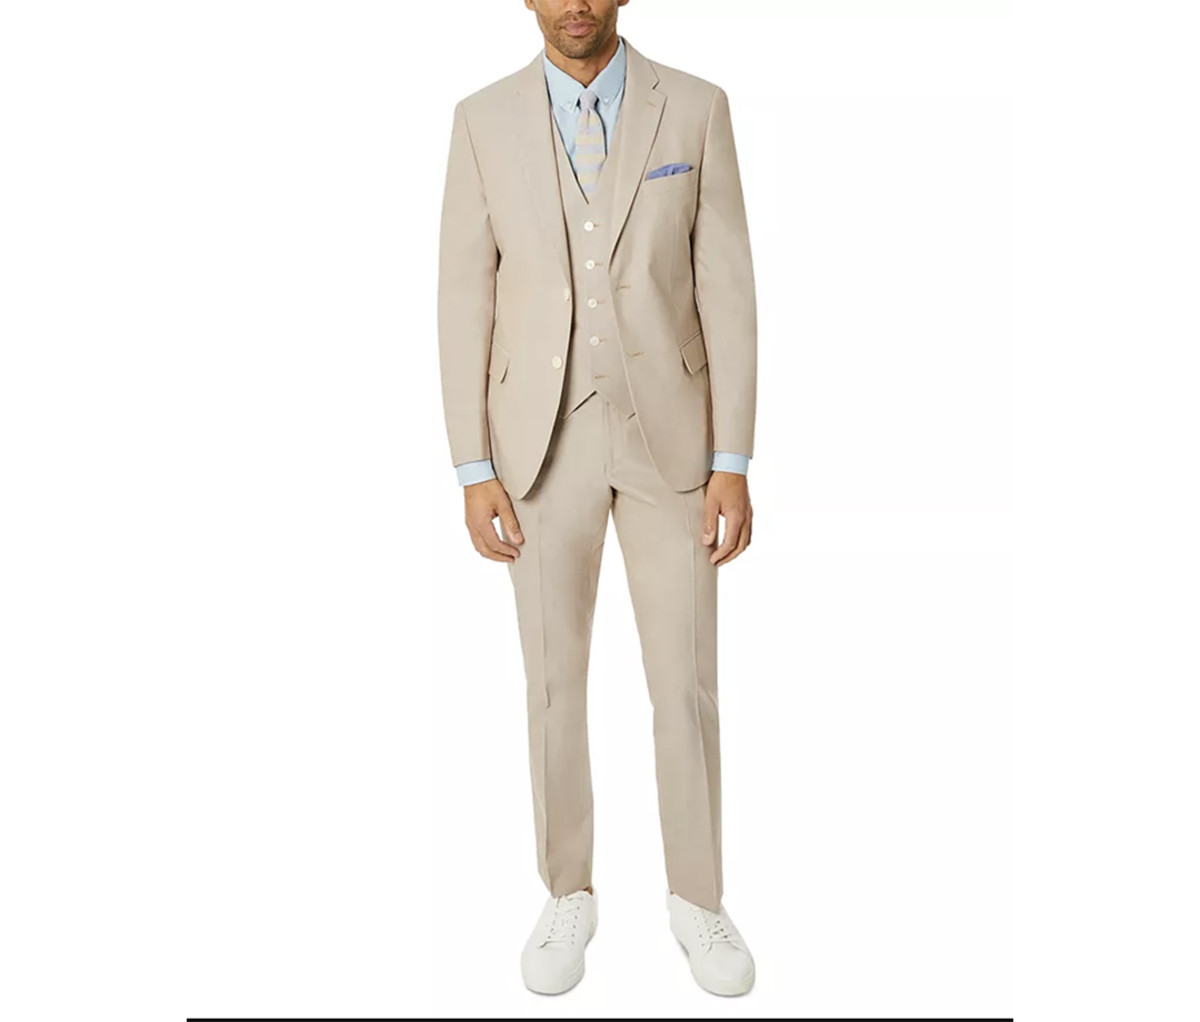 Add This Tommy Hilfiger Suit to Your Collection Right Now - Men's Journal